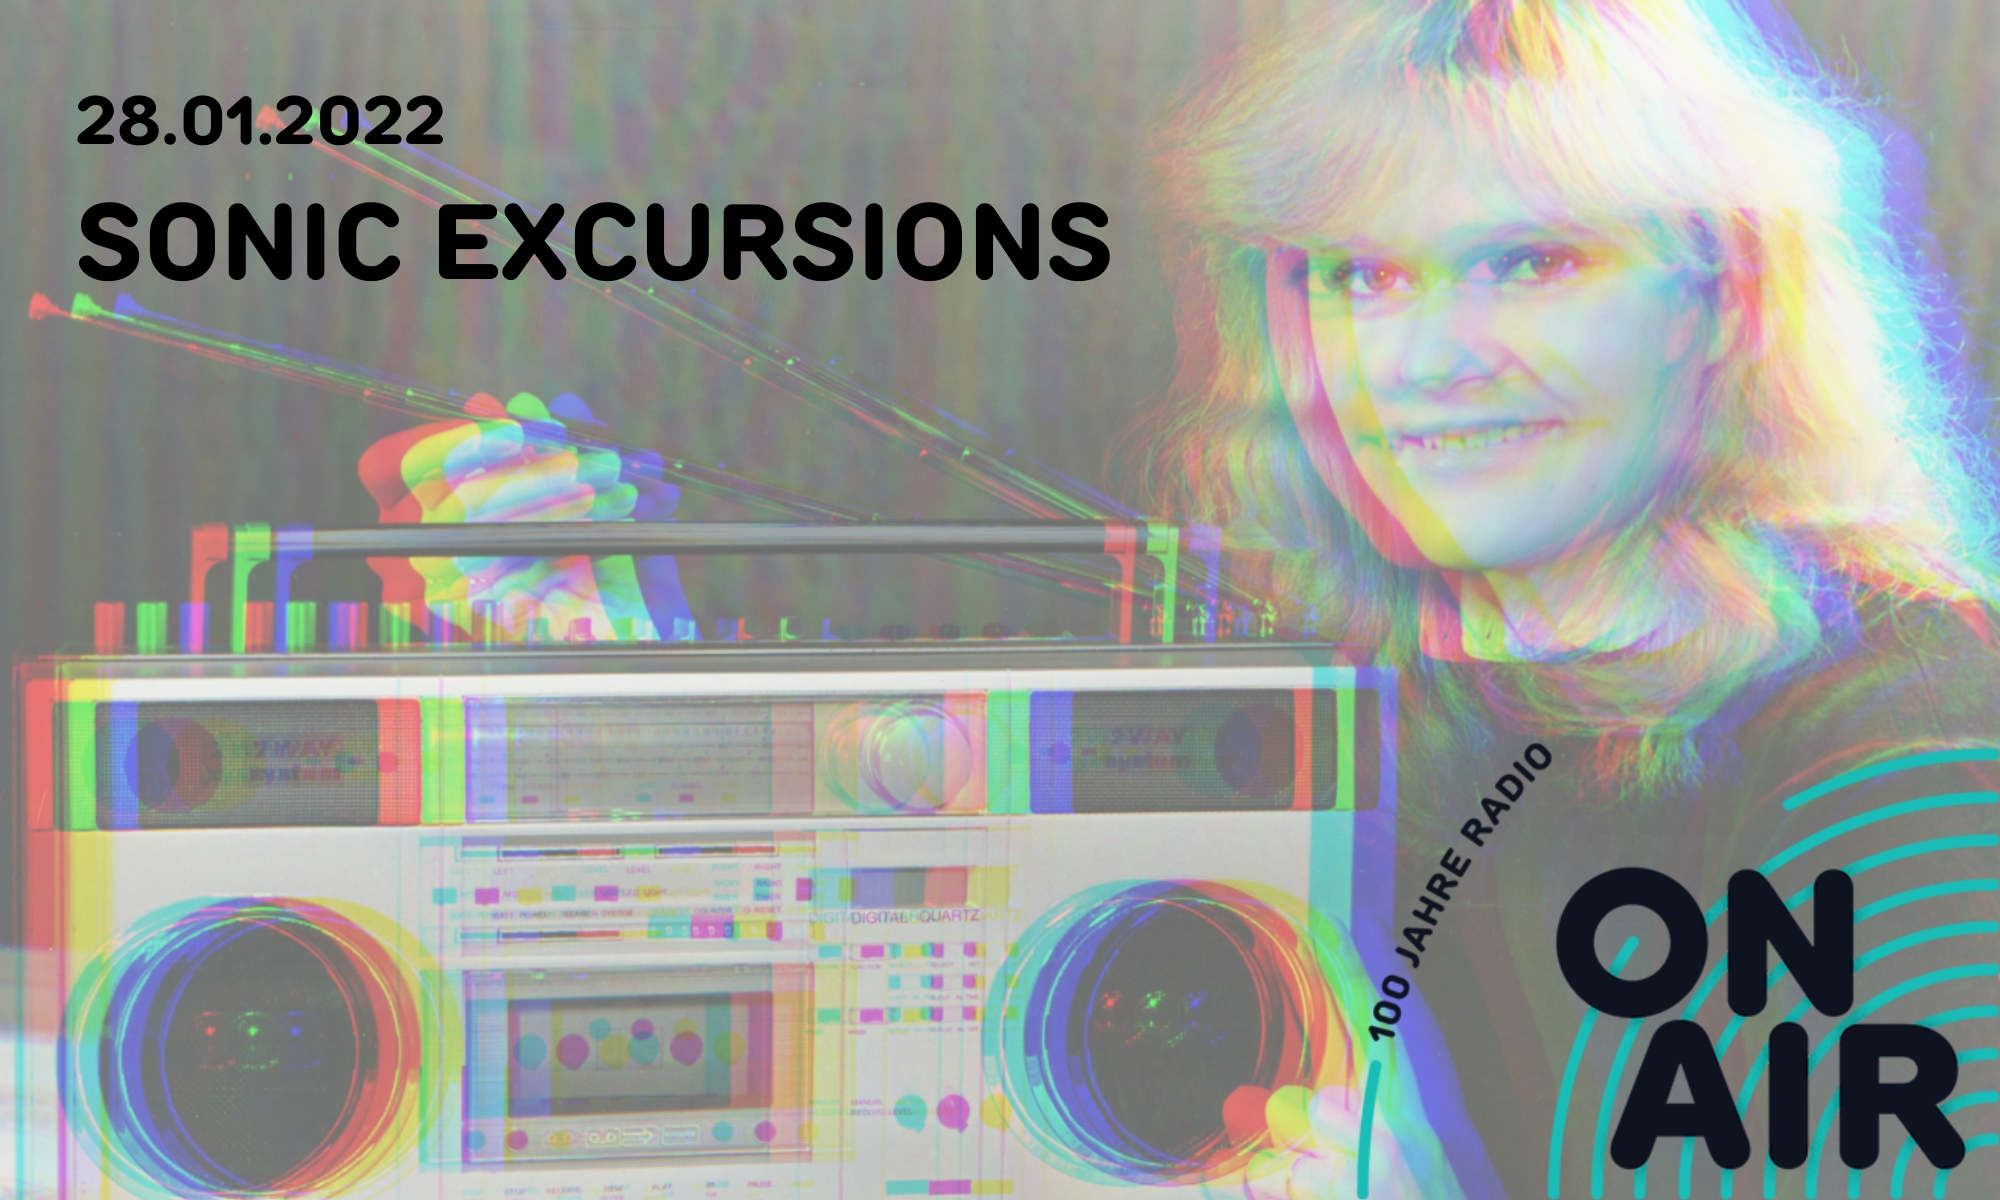 #Sonic Excursions III: On Air. 100 Jahre Radio